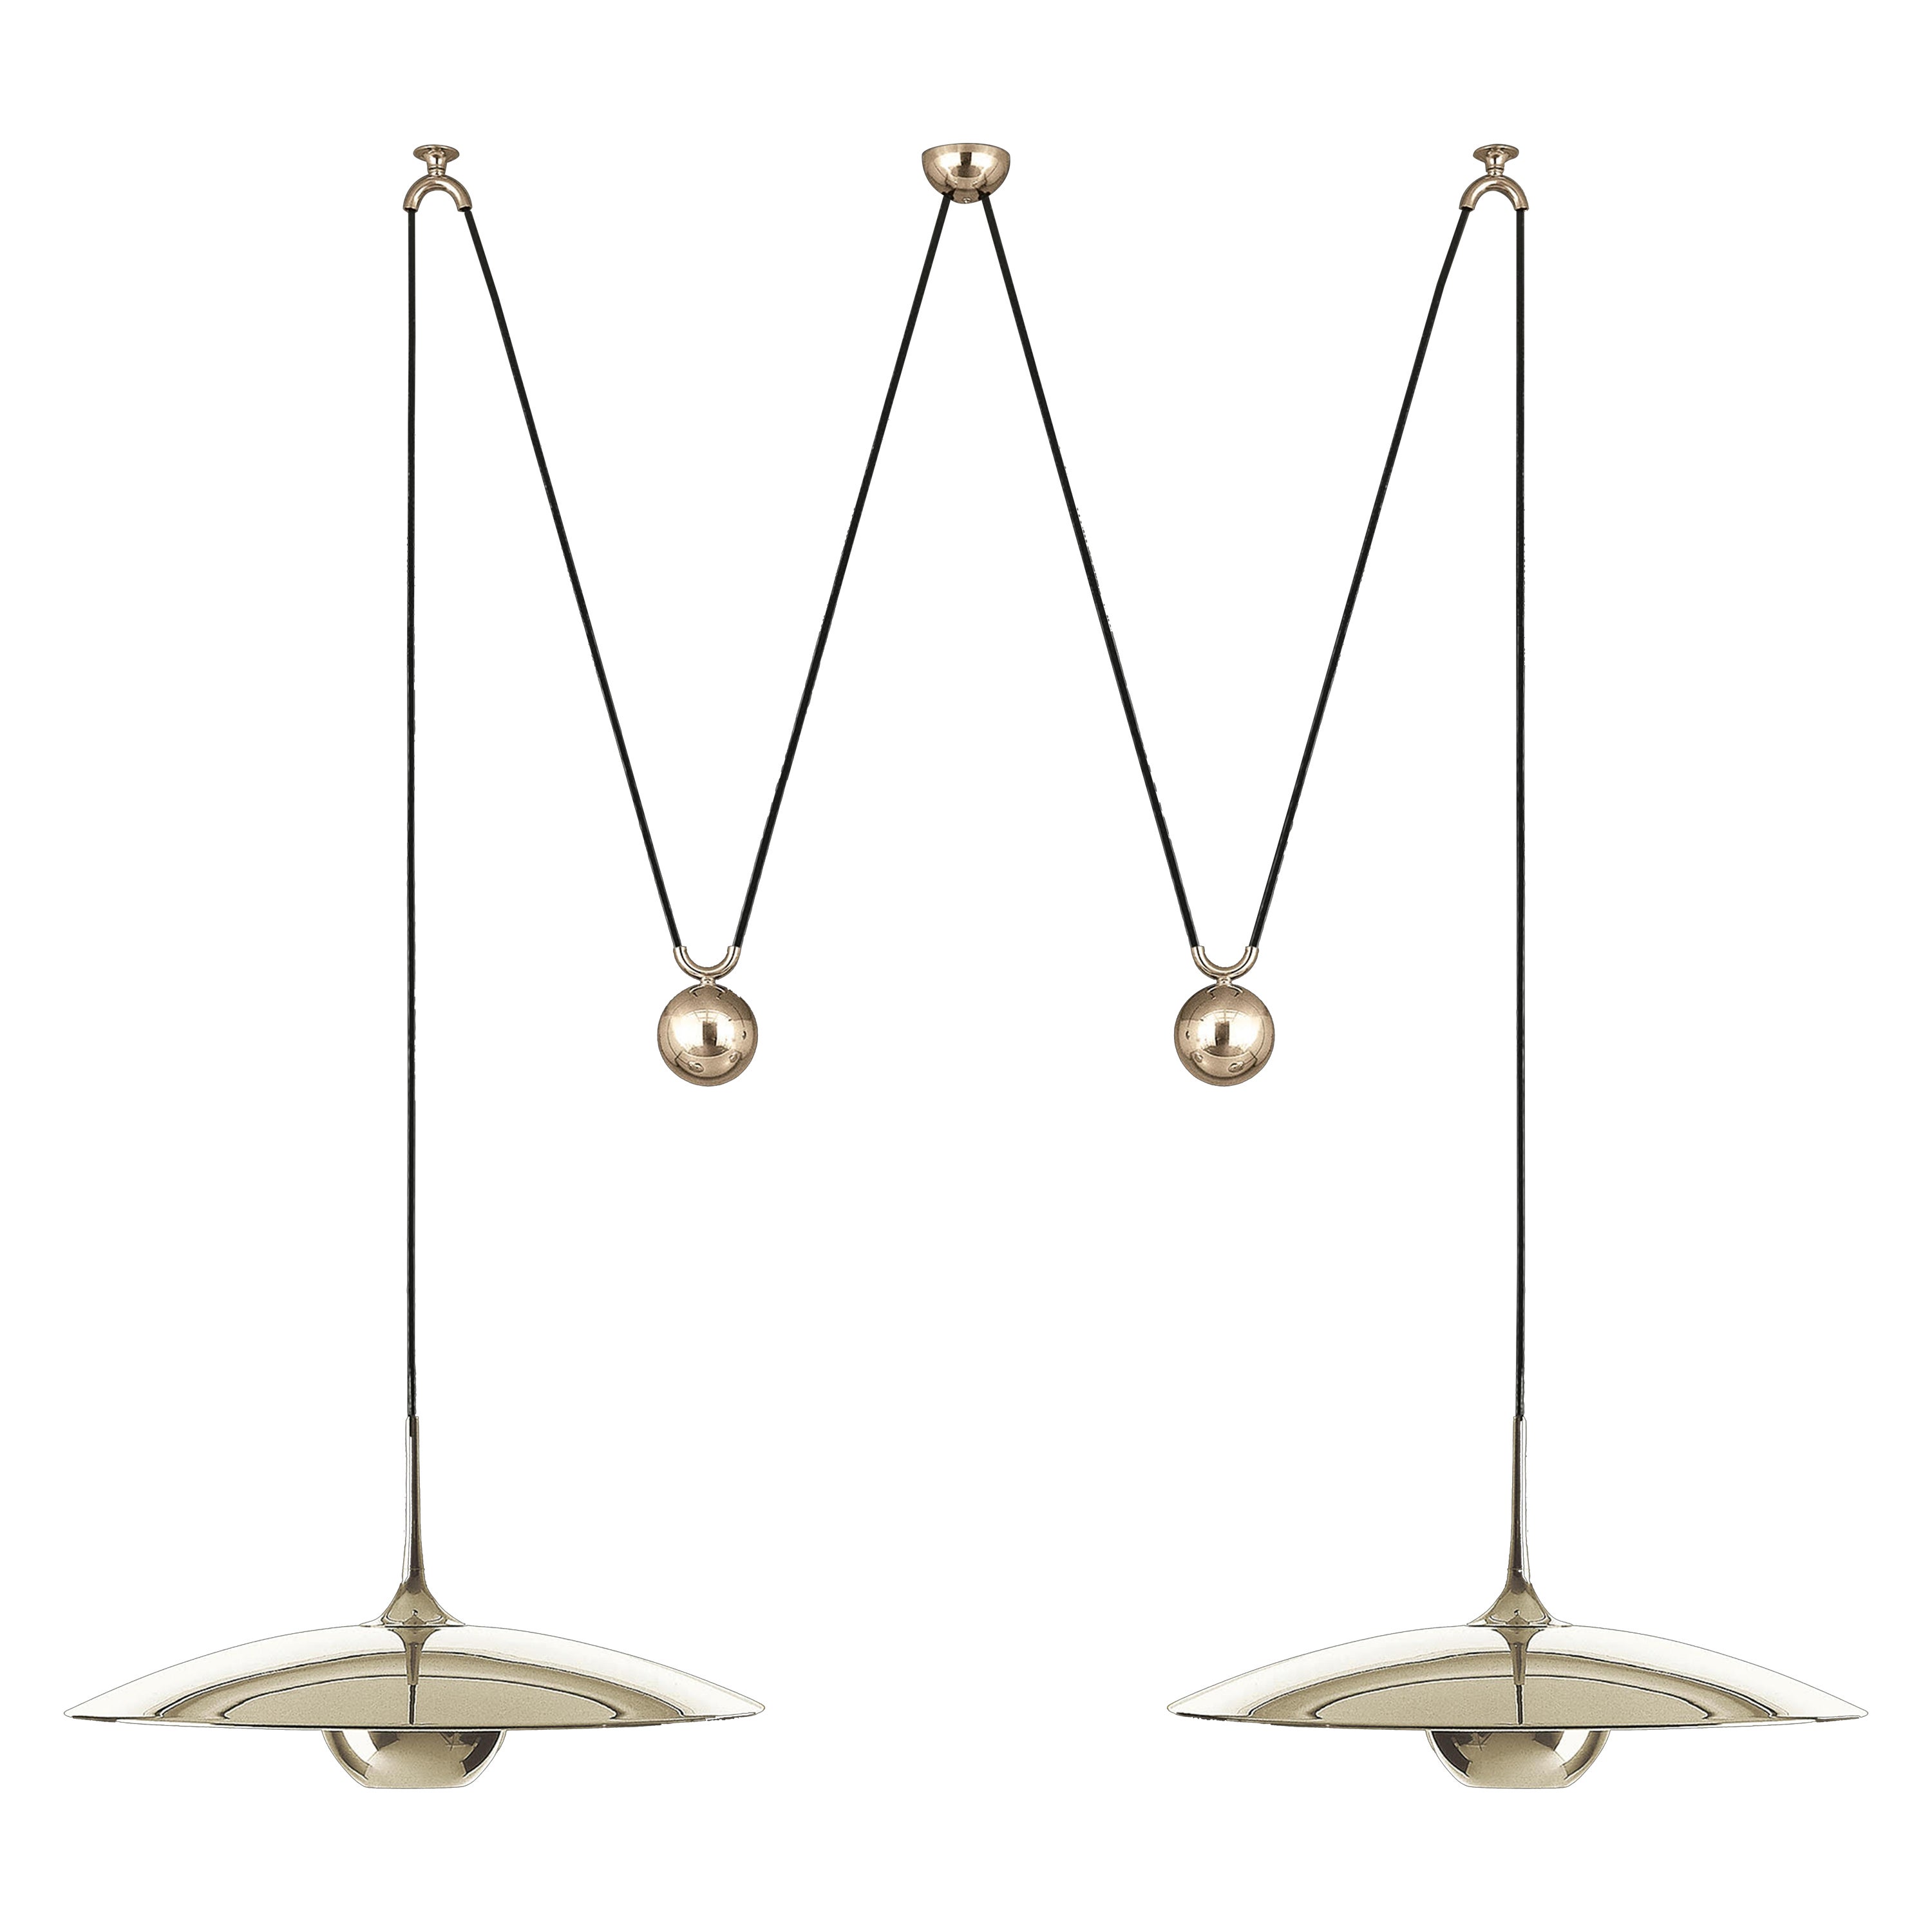 Florian Schulz Double Onos 55 in Polished Brass with Side Counterweight